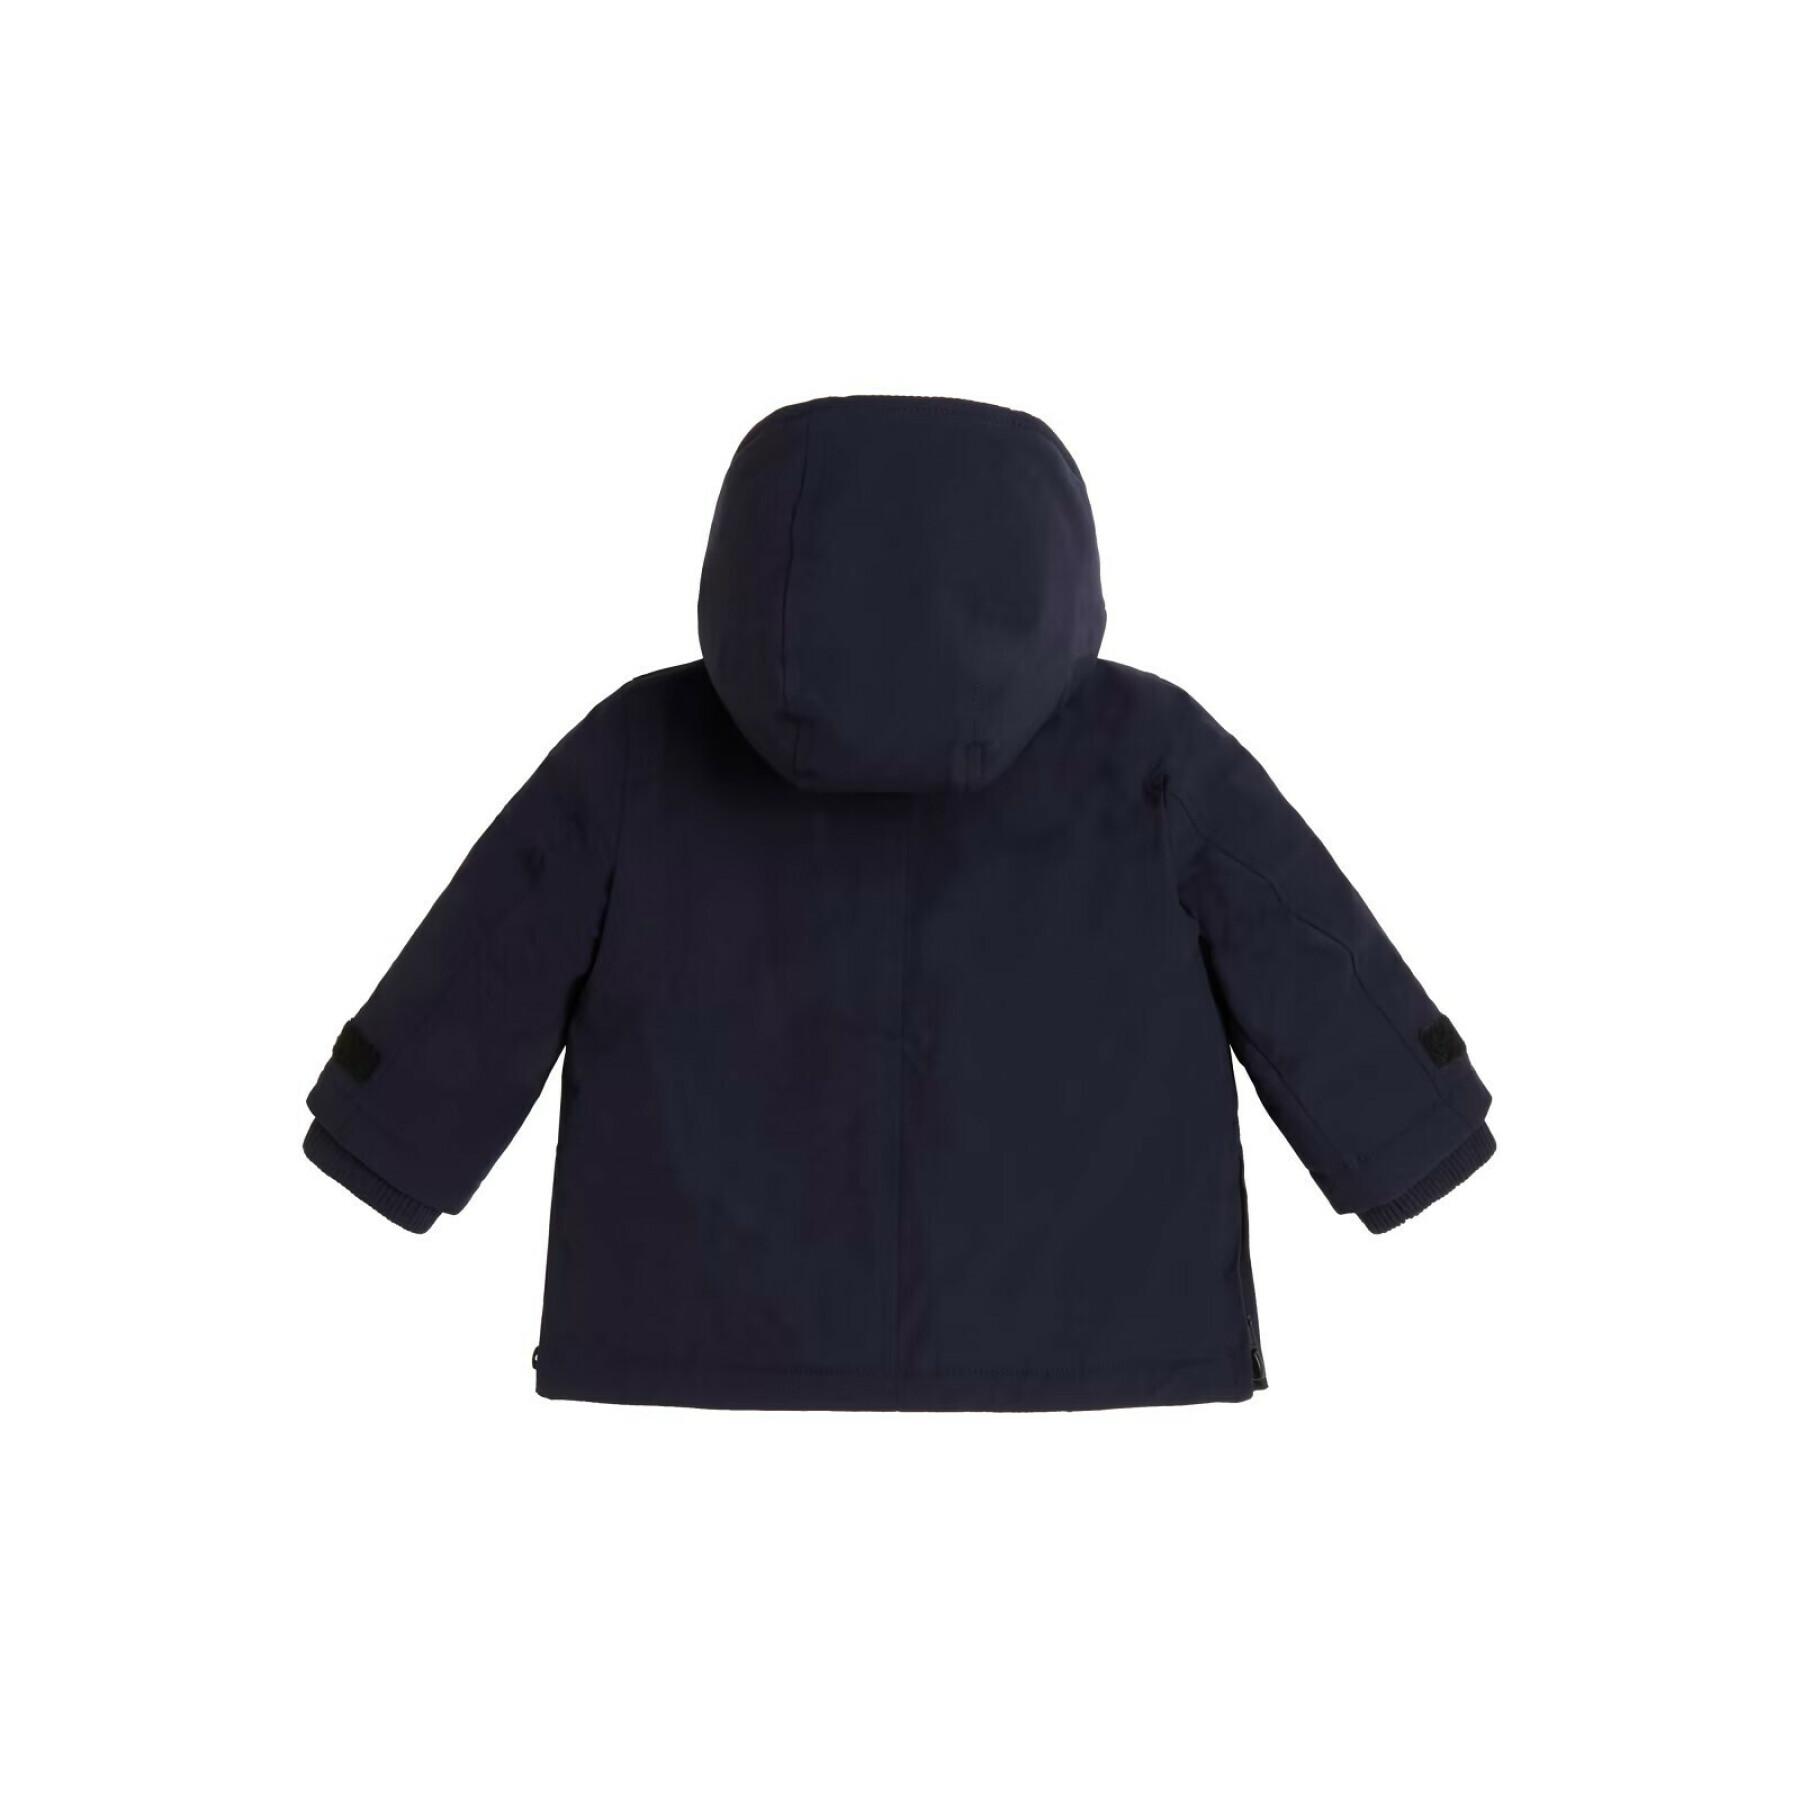 Boy's synthetic fur hooded parka Guess